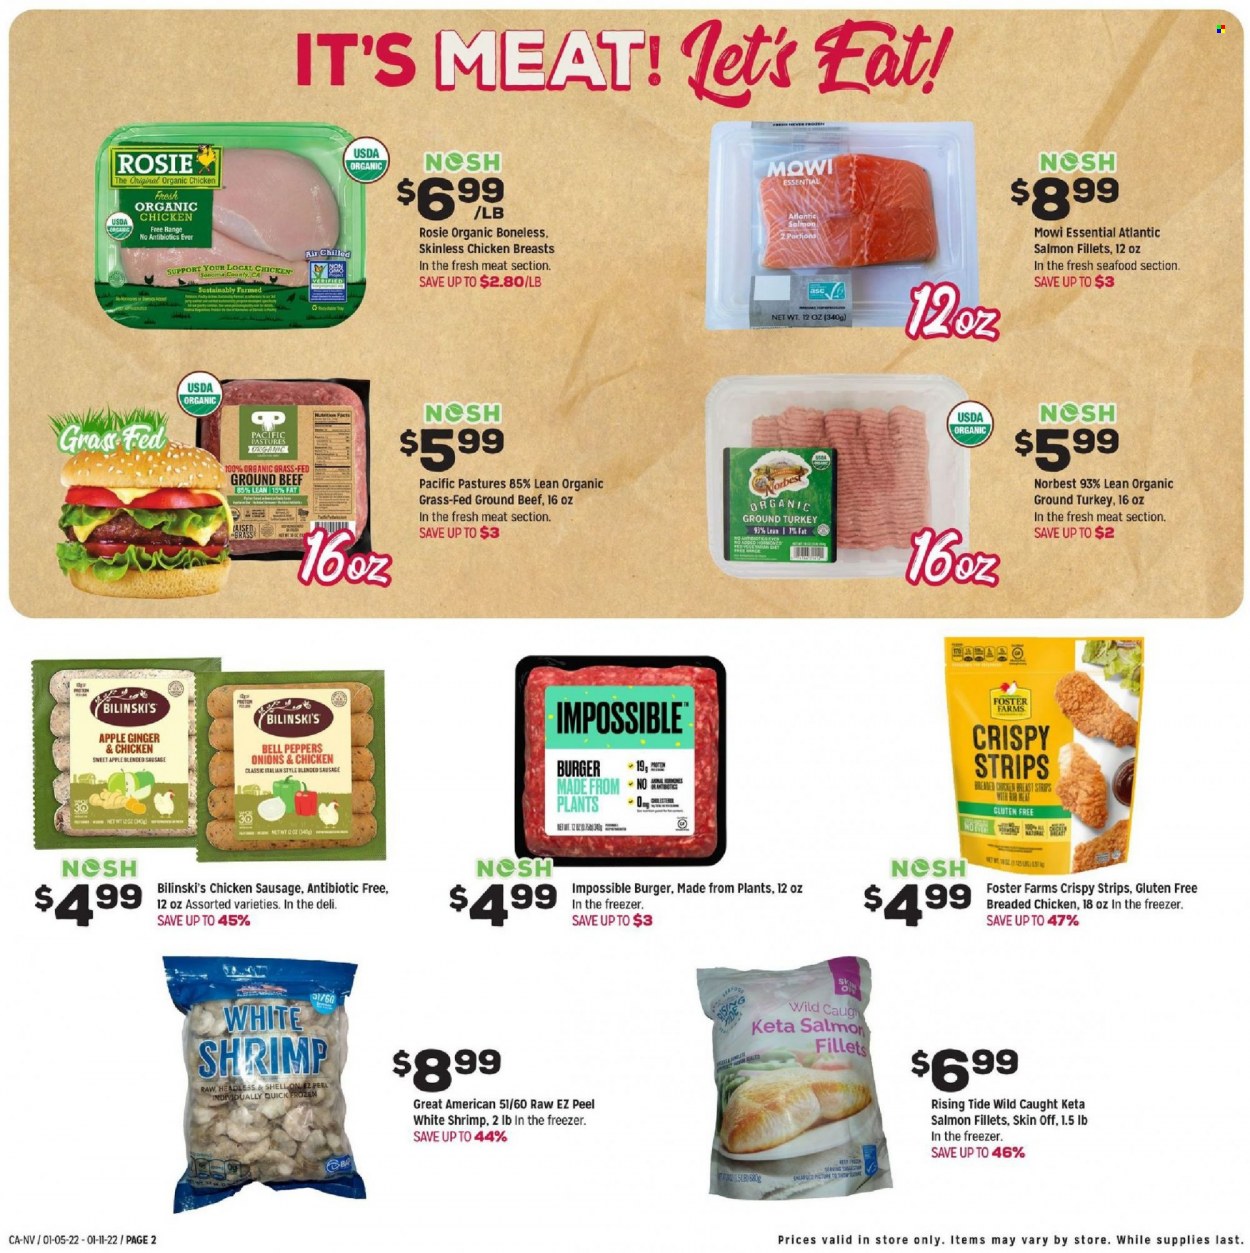 Grocery Outlet ad  - 01.05.2022 - 01.11.2022.